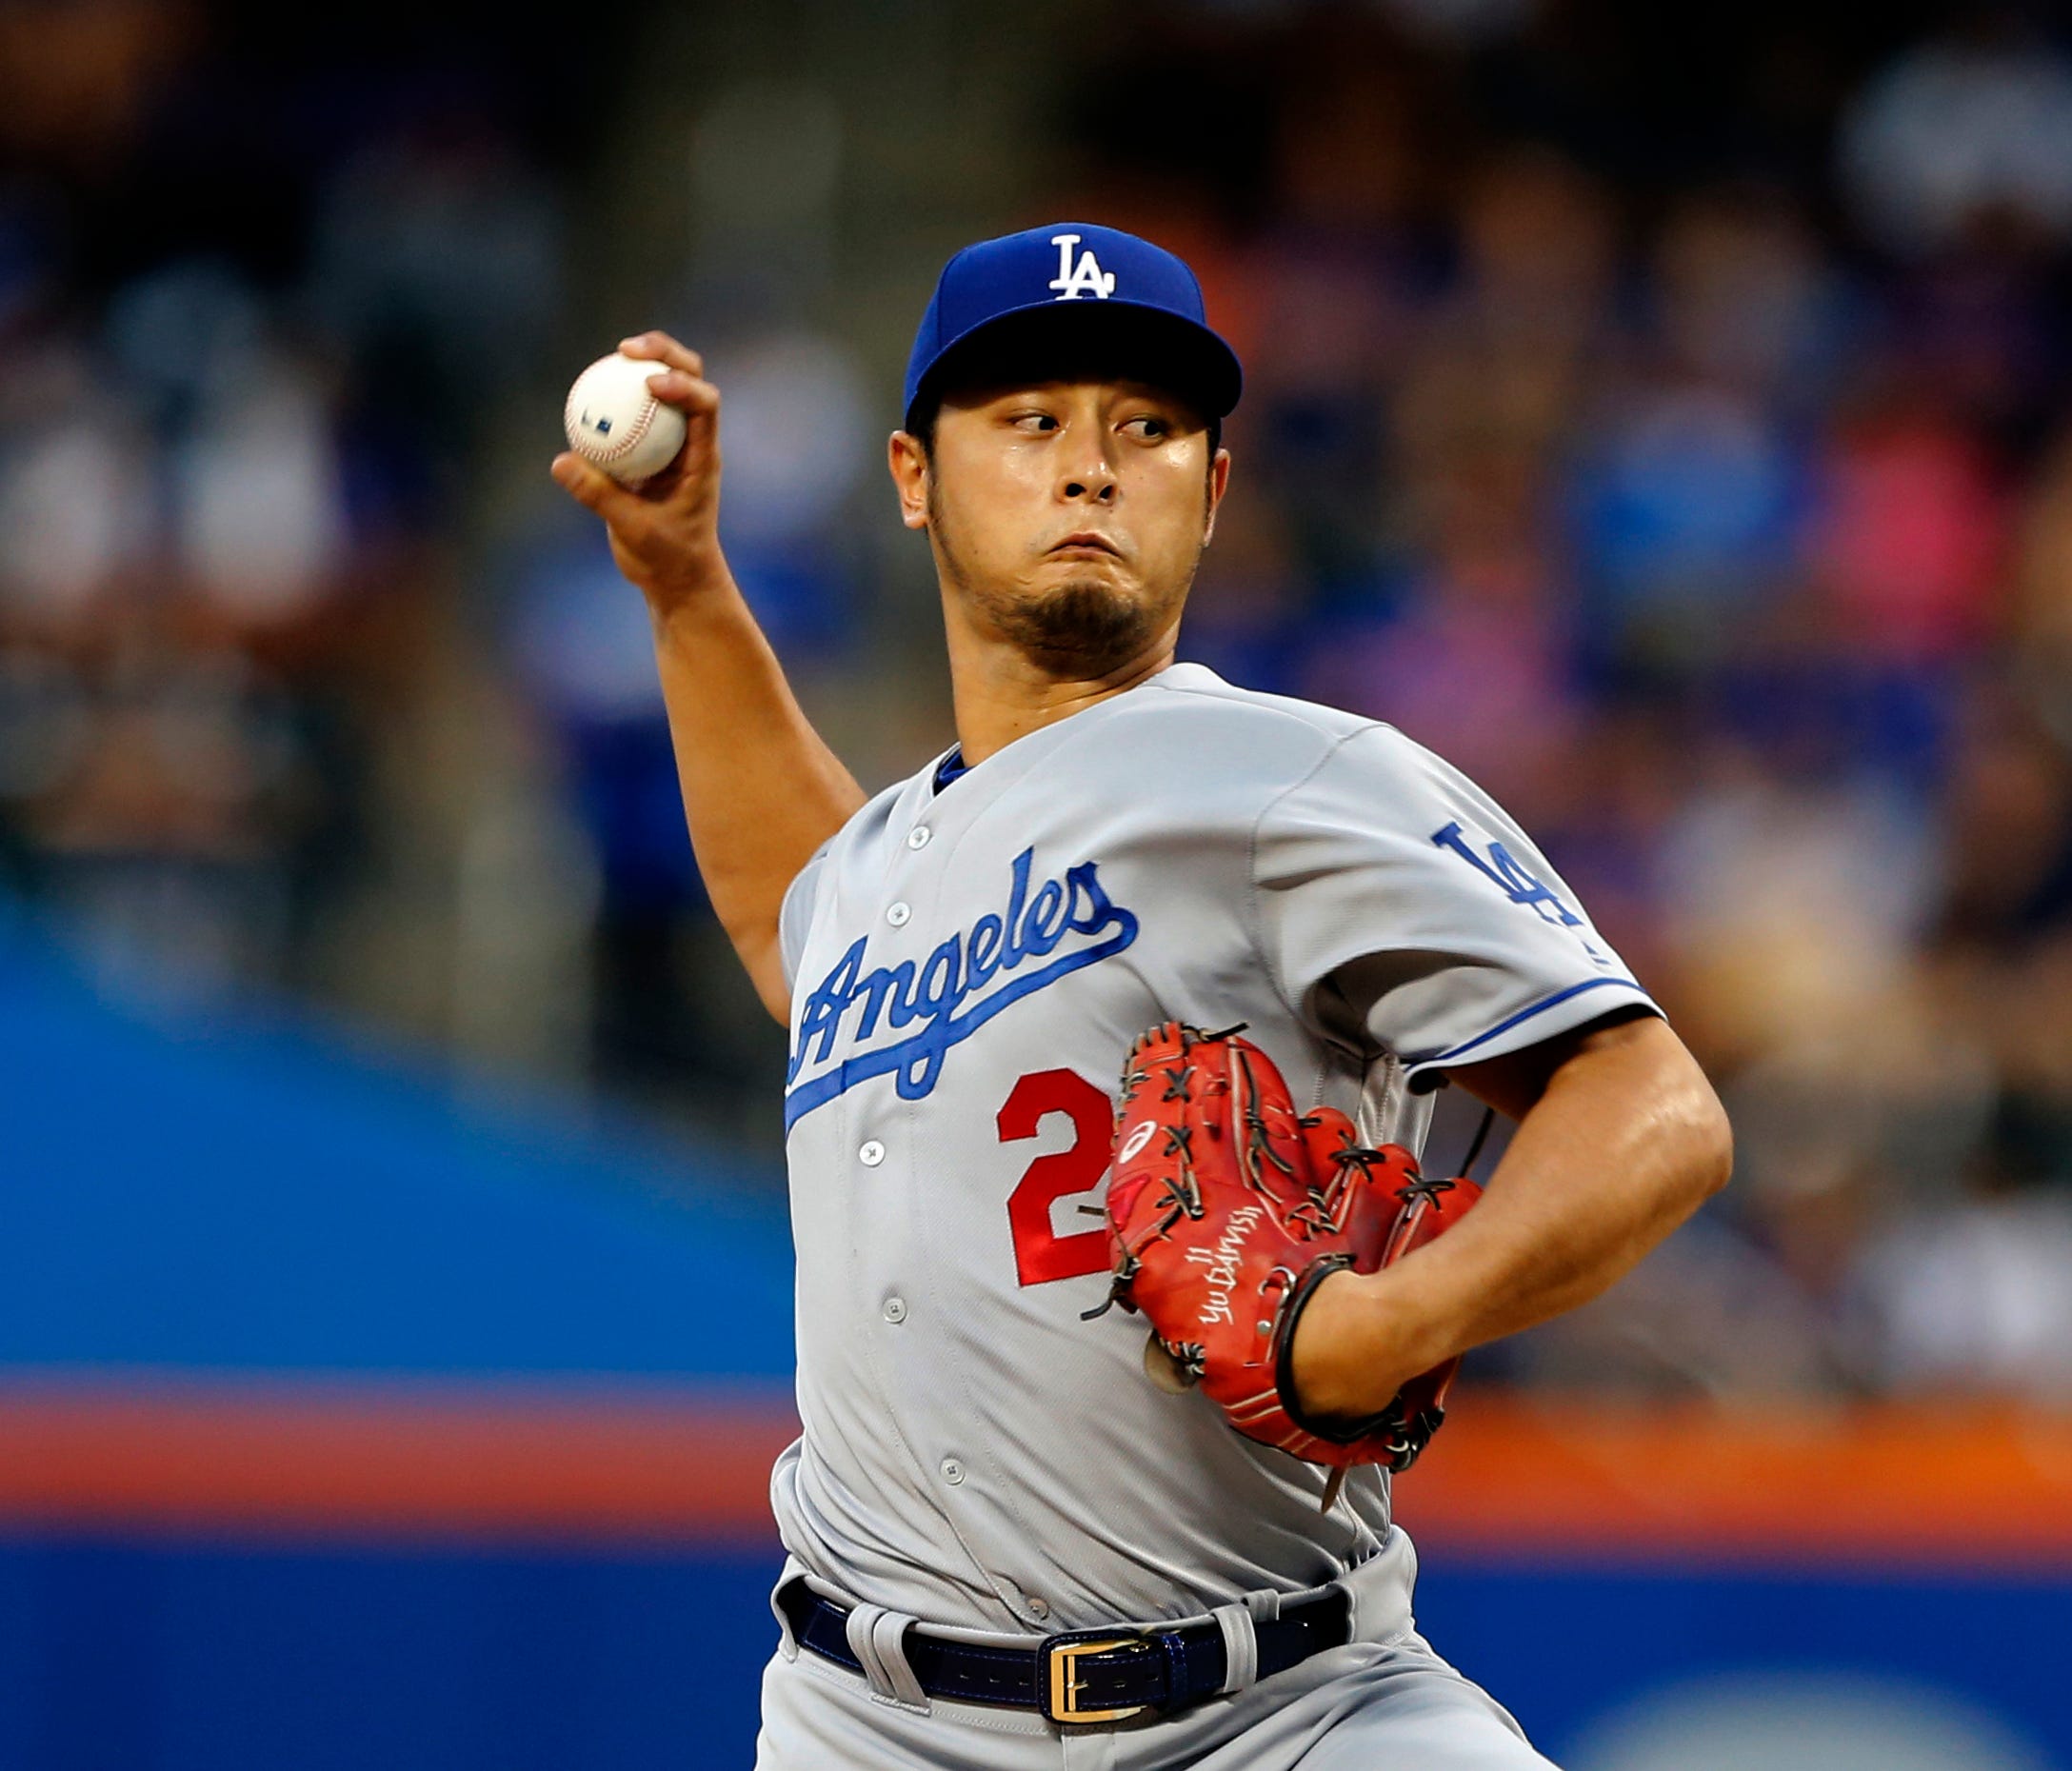 Yu Darvish shined in his Dodgers debut.